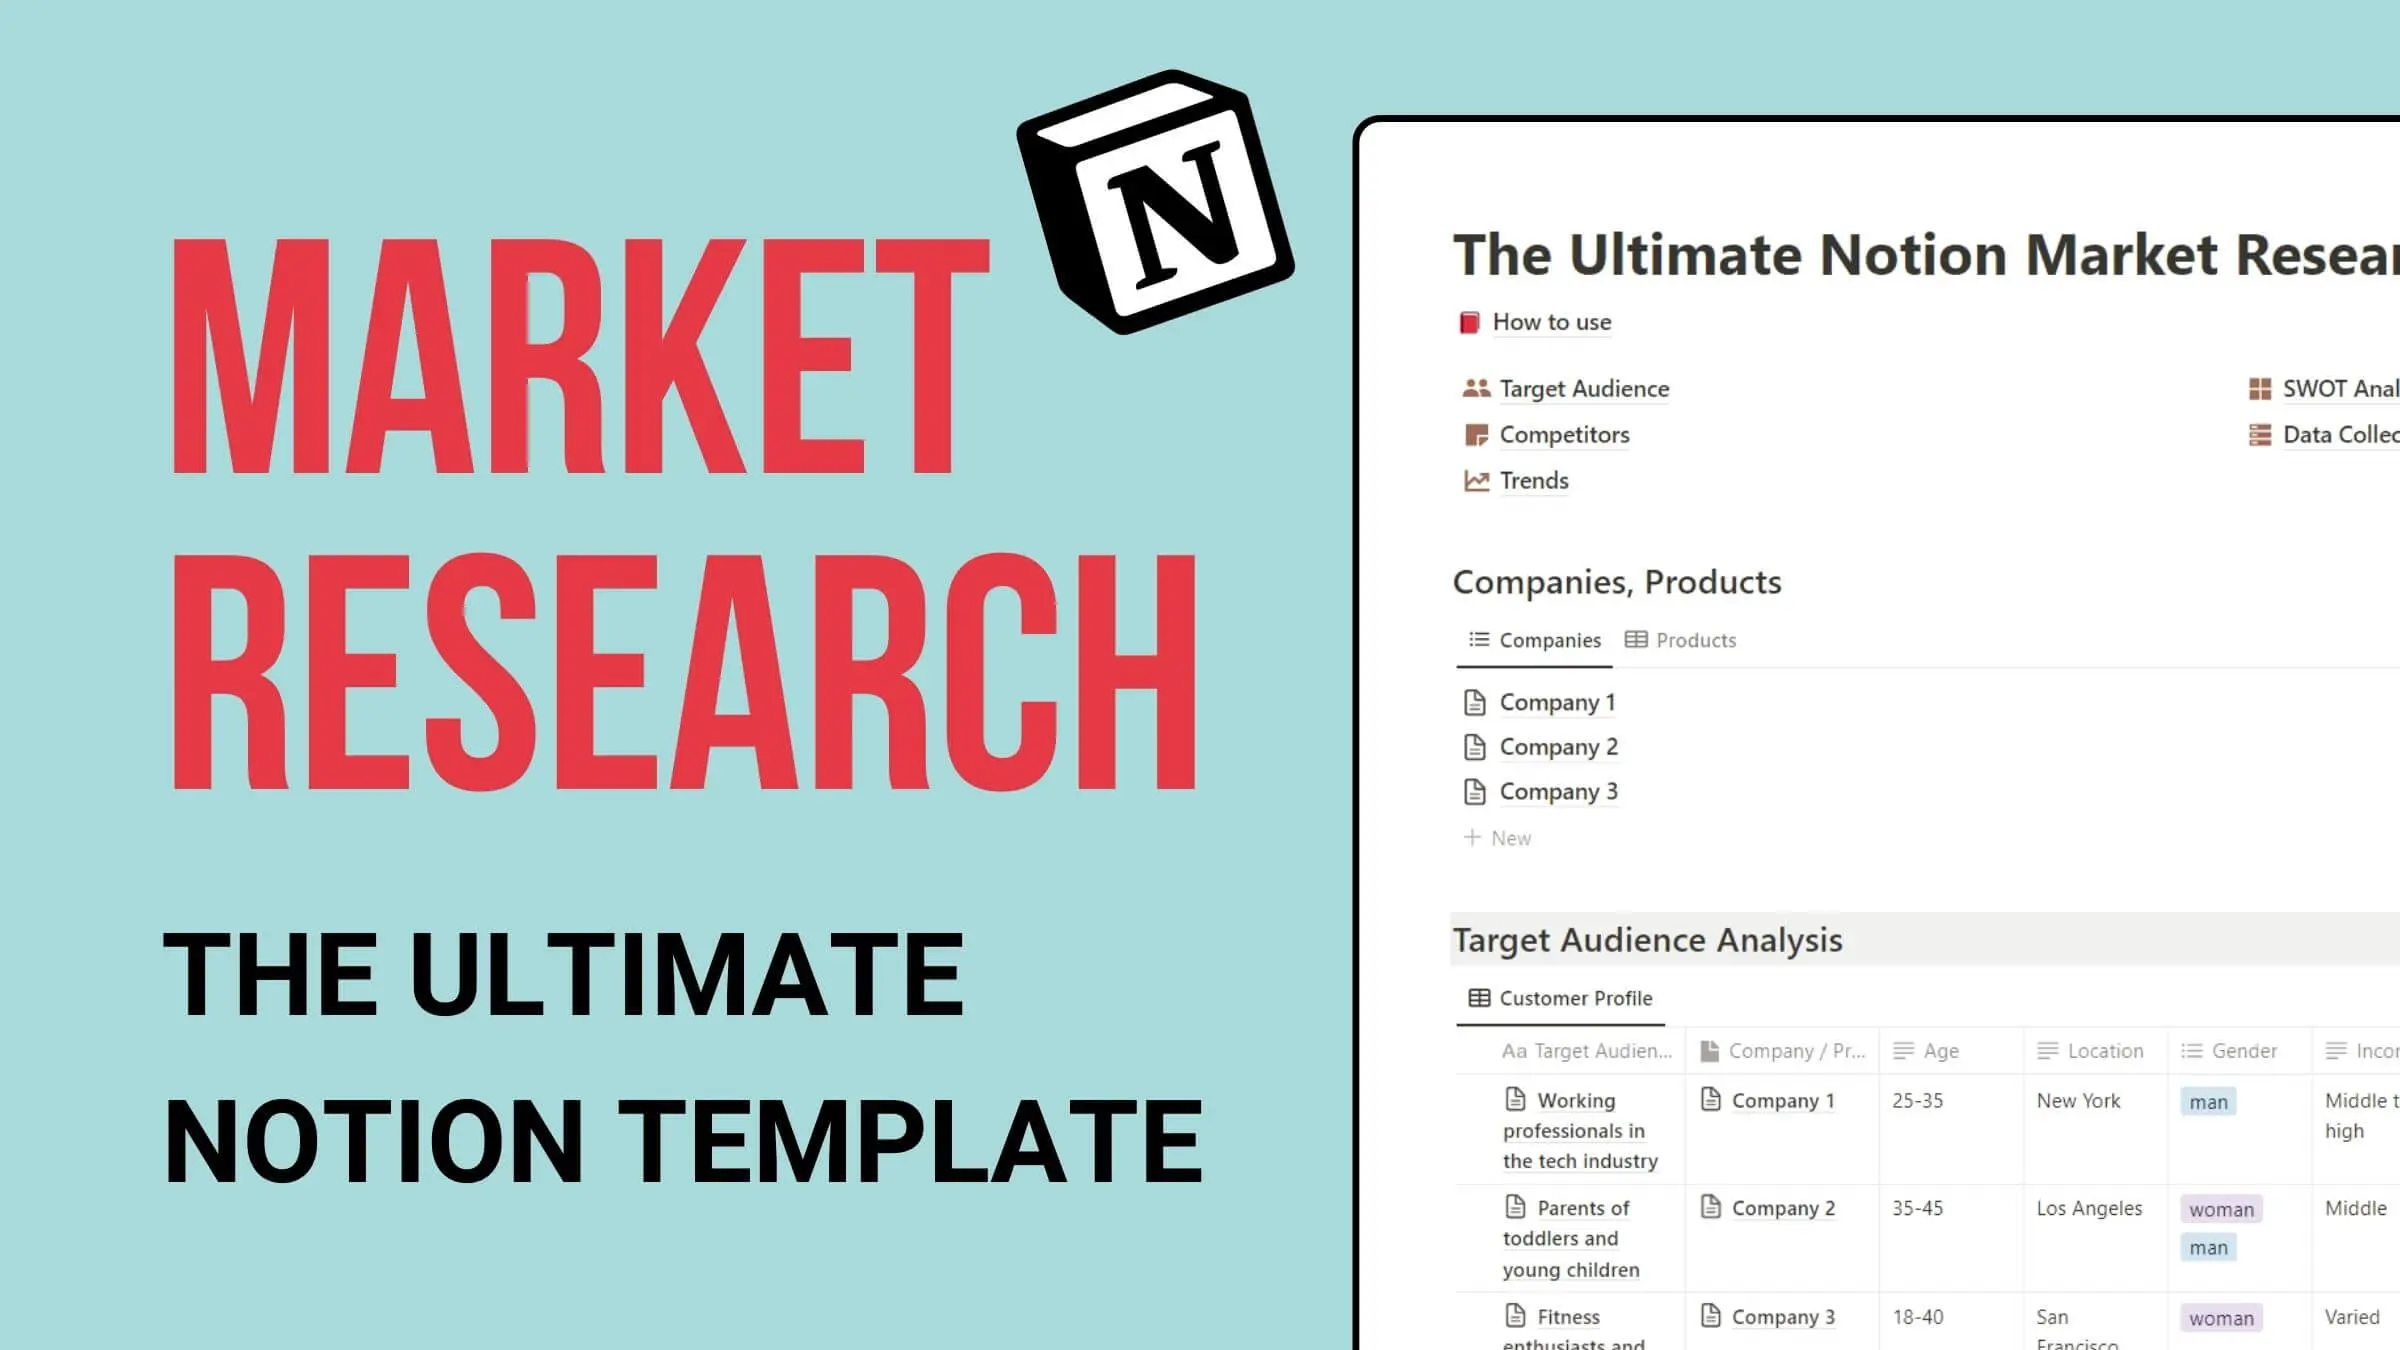 The Ultimate Notion Market Research Template image